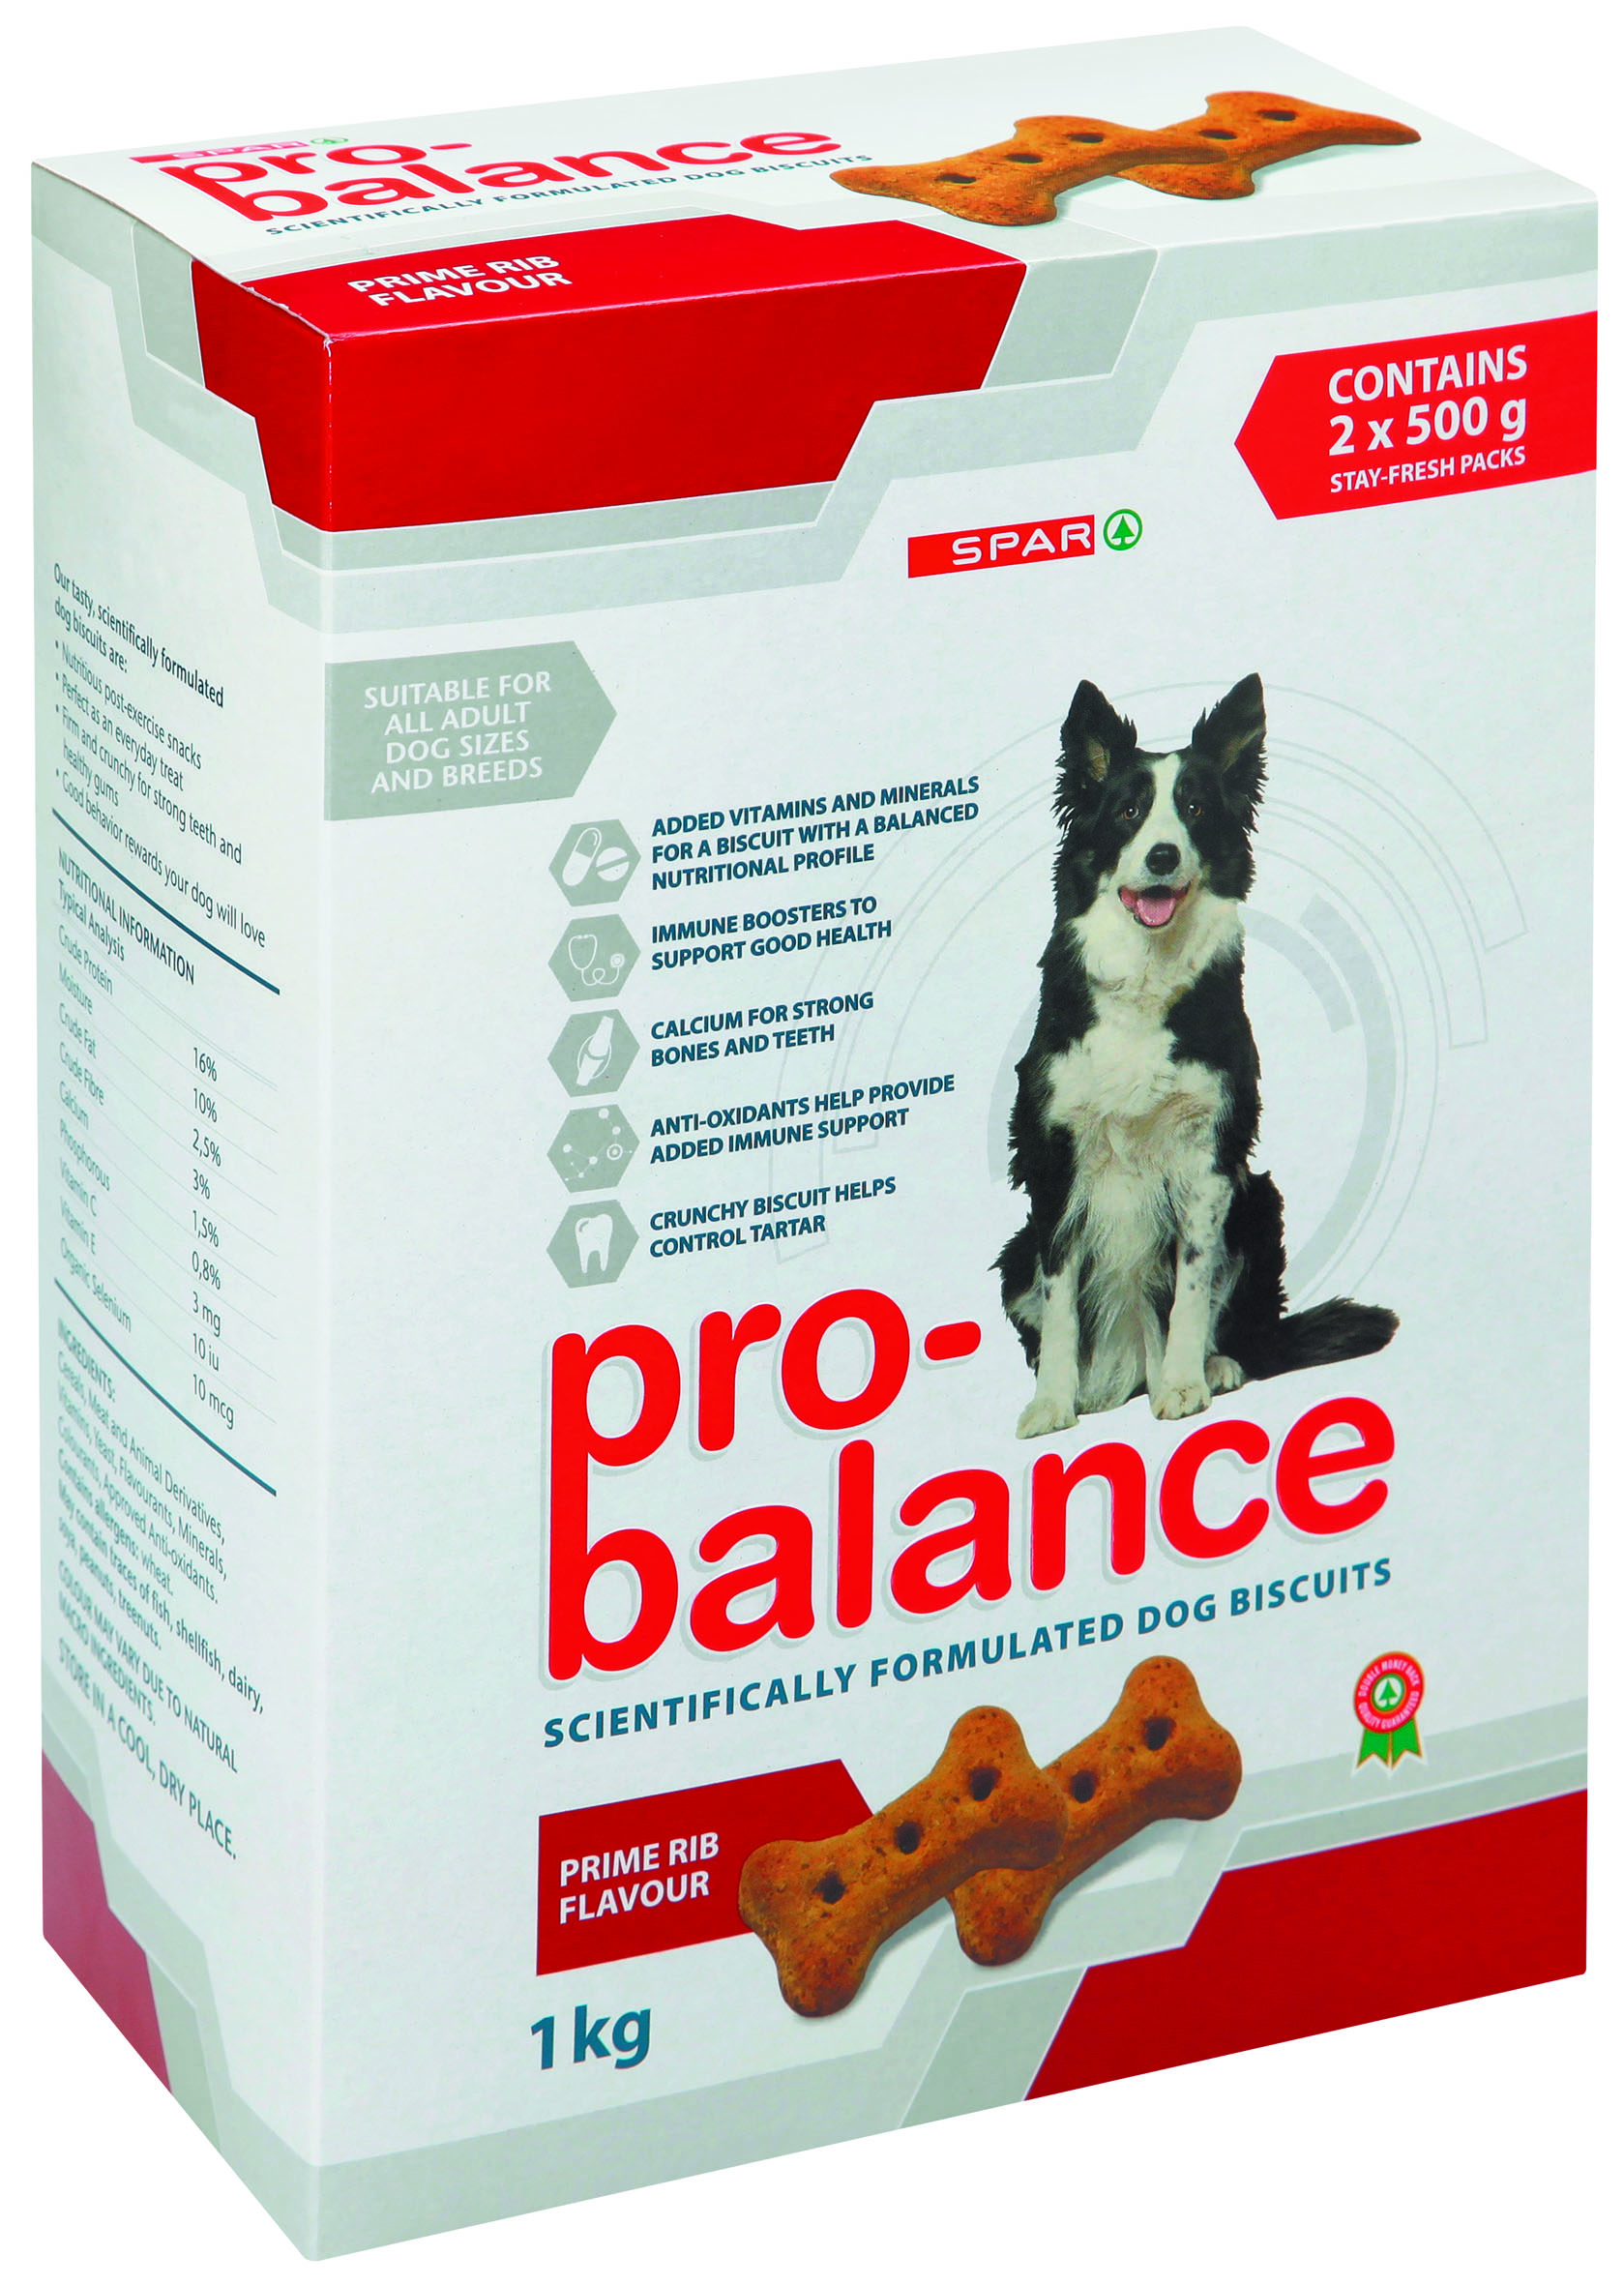 pro-balance dog biscuits prime rib flavour